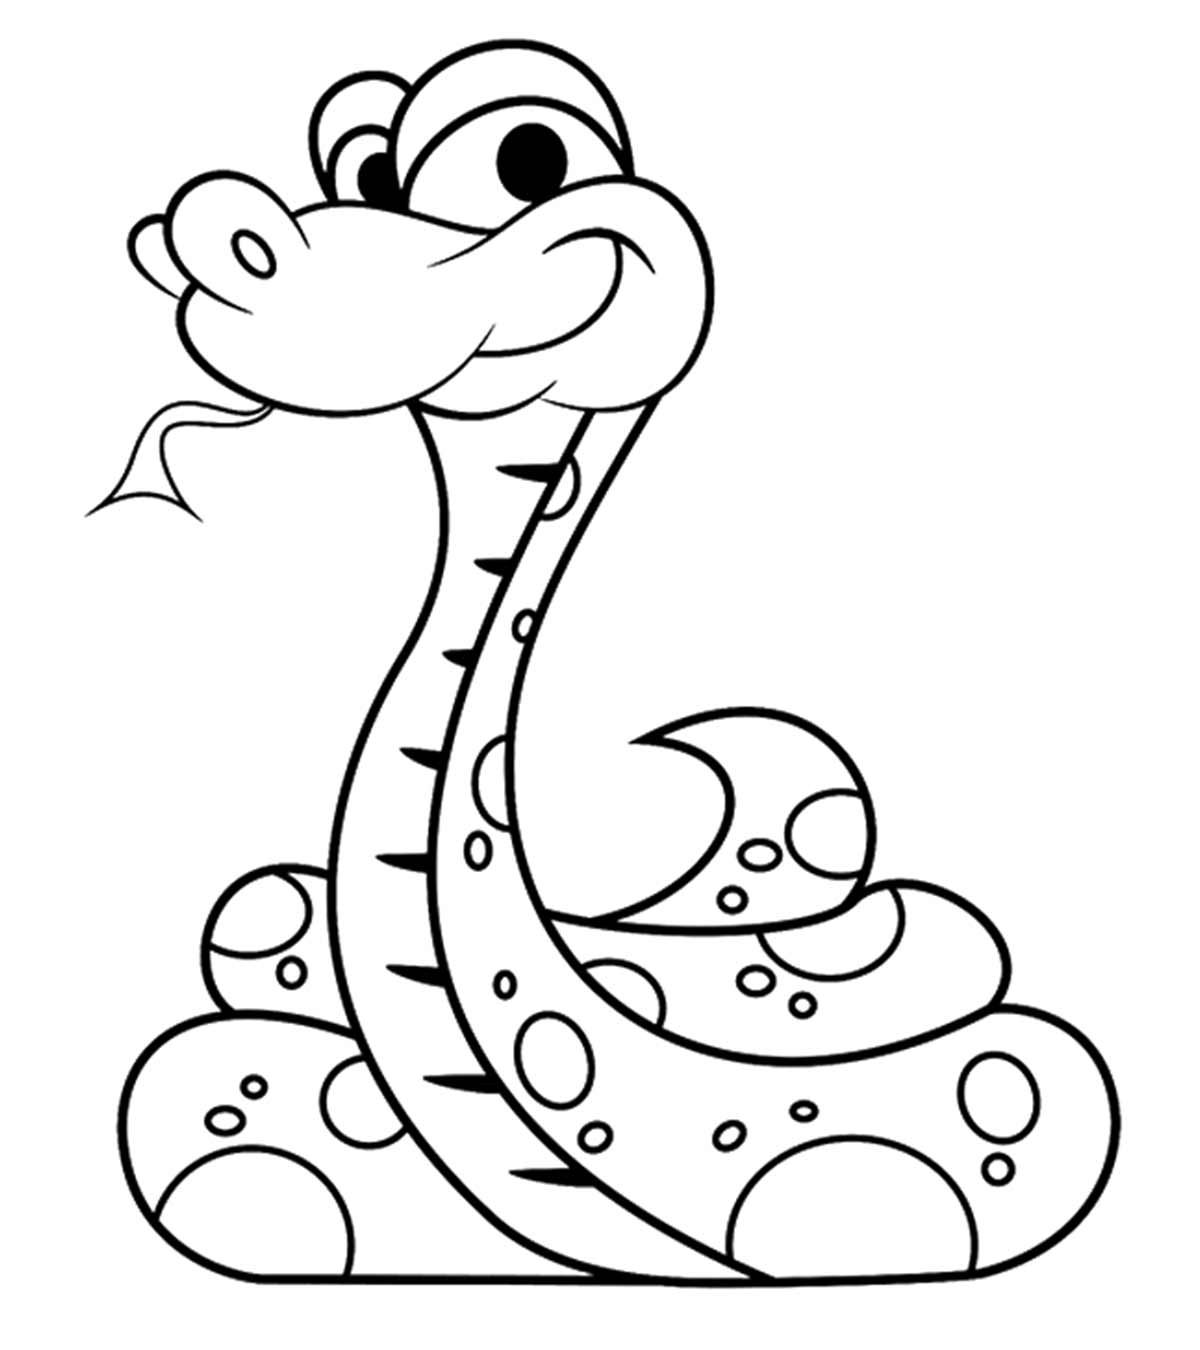 Top 25 Snake Coloring Pages For Your Naughty Kid_image